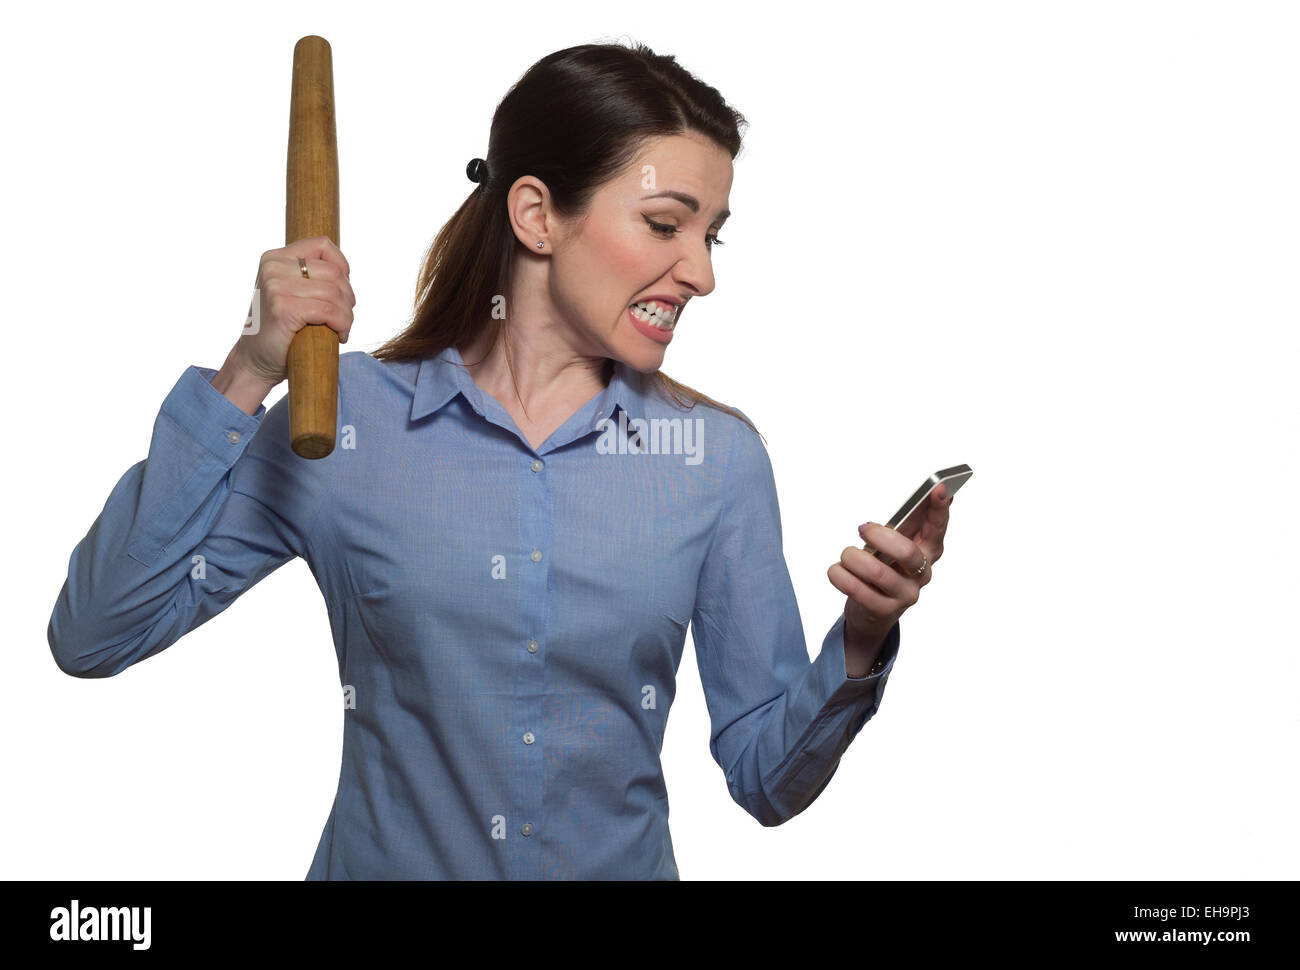 Angry woman screaming and threatens with rolling-pin holding a phone isolated on white background Stock Photo